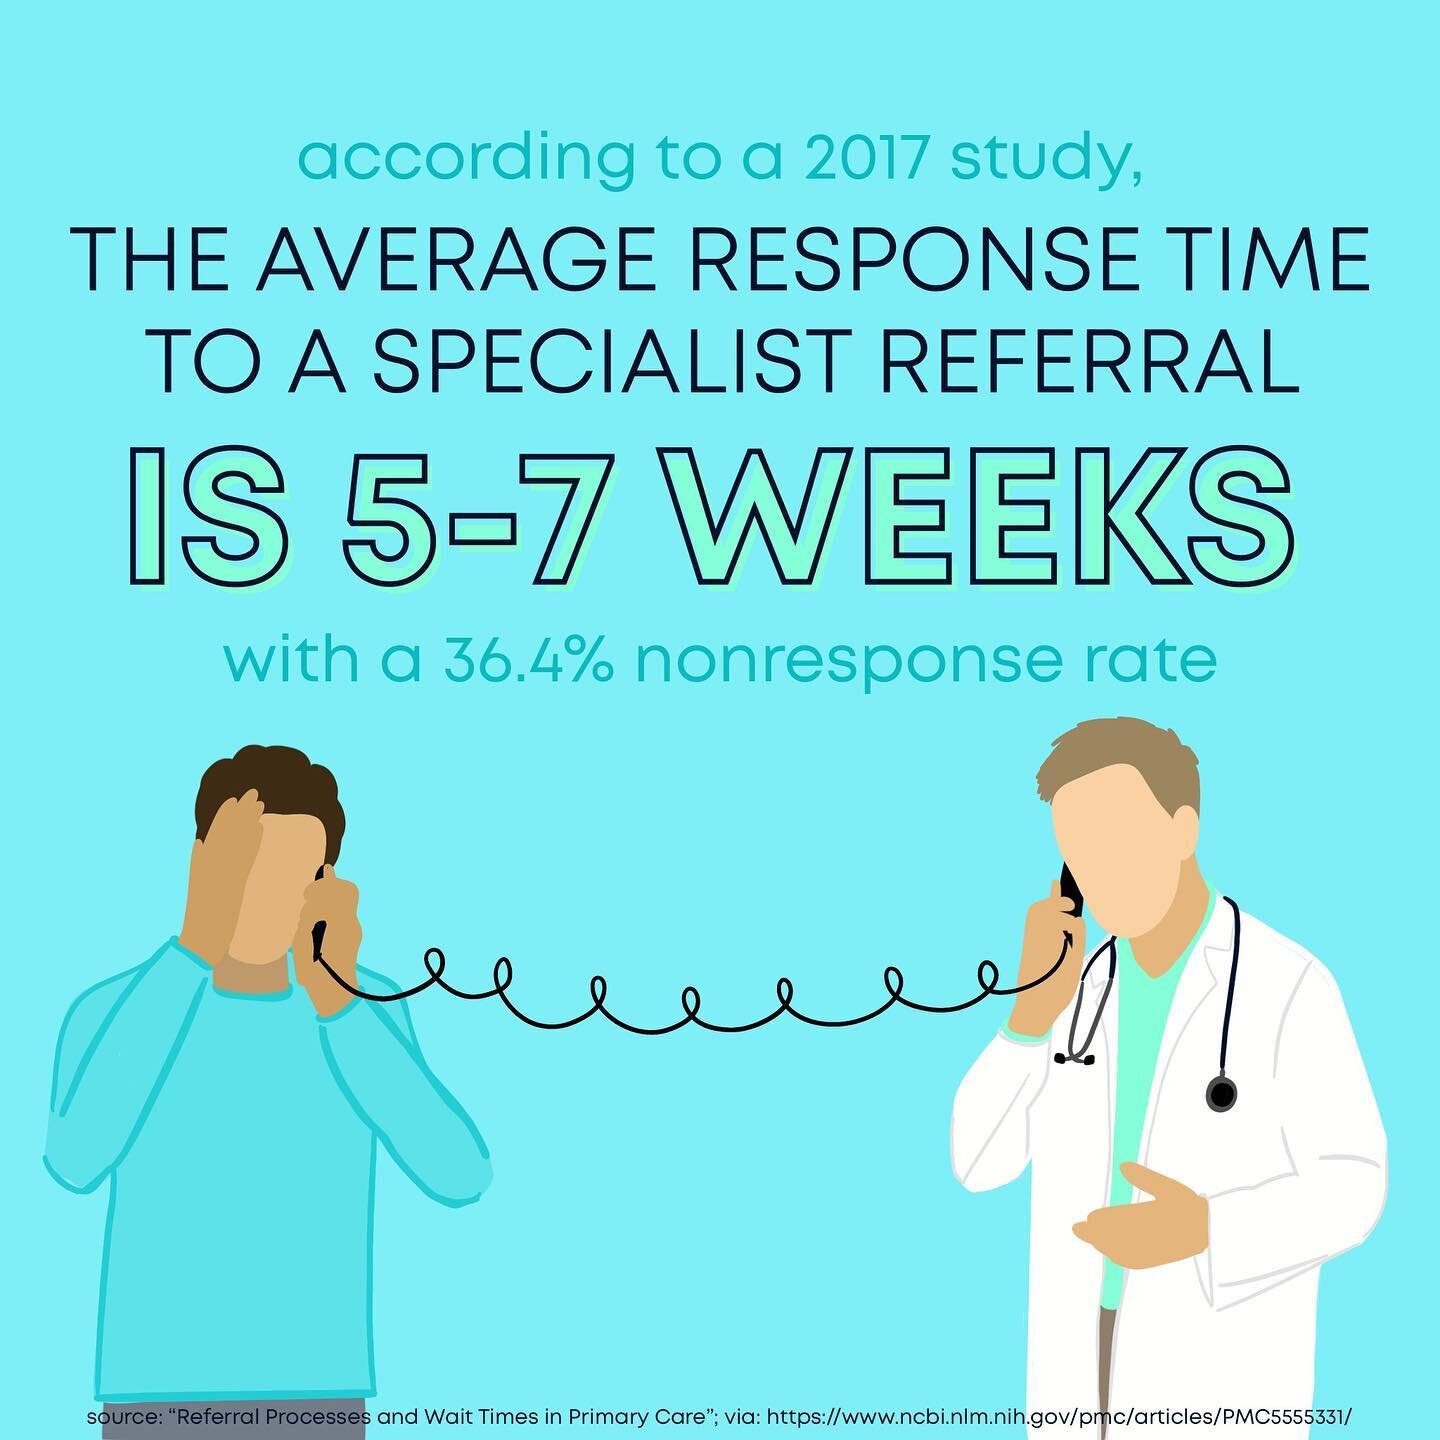 Did you know that a 2017 study found the average response time to a specialist referral is 5-7 weeks? 

&amp; additionally there is a 36.4% nonresponse rate to specialist referrals. 

This delay in response time further impedes scheduling which then 